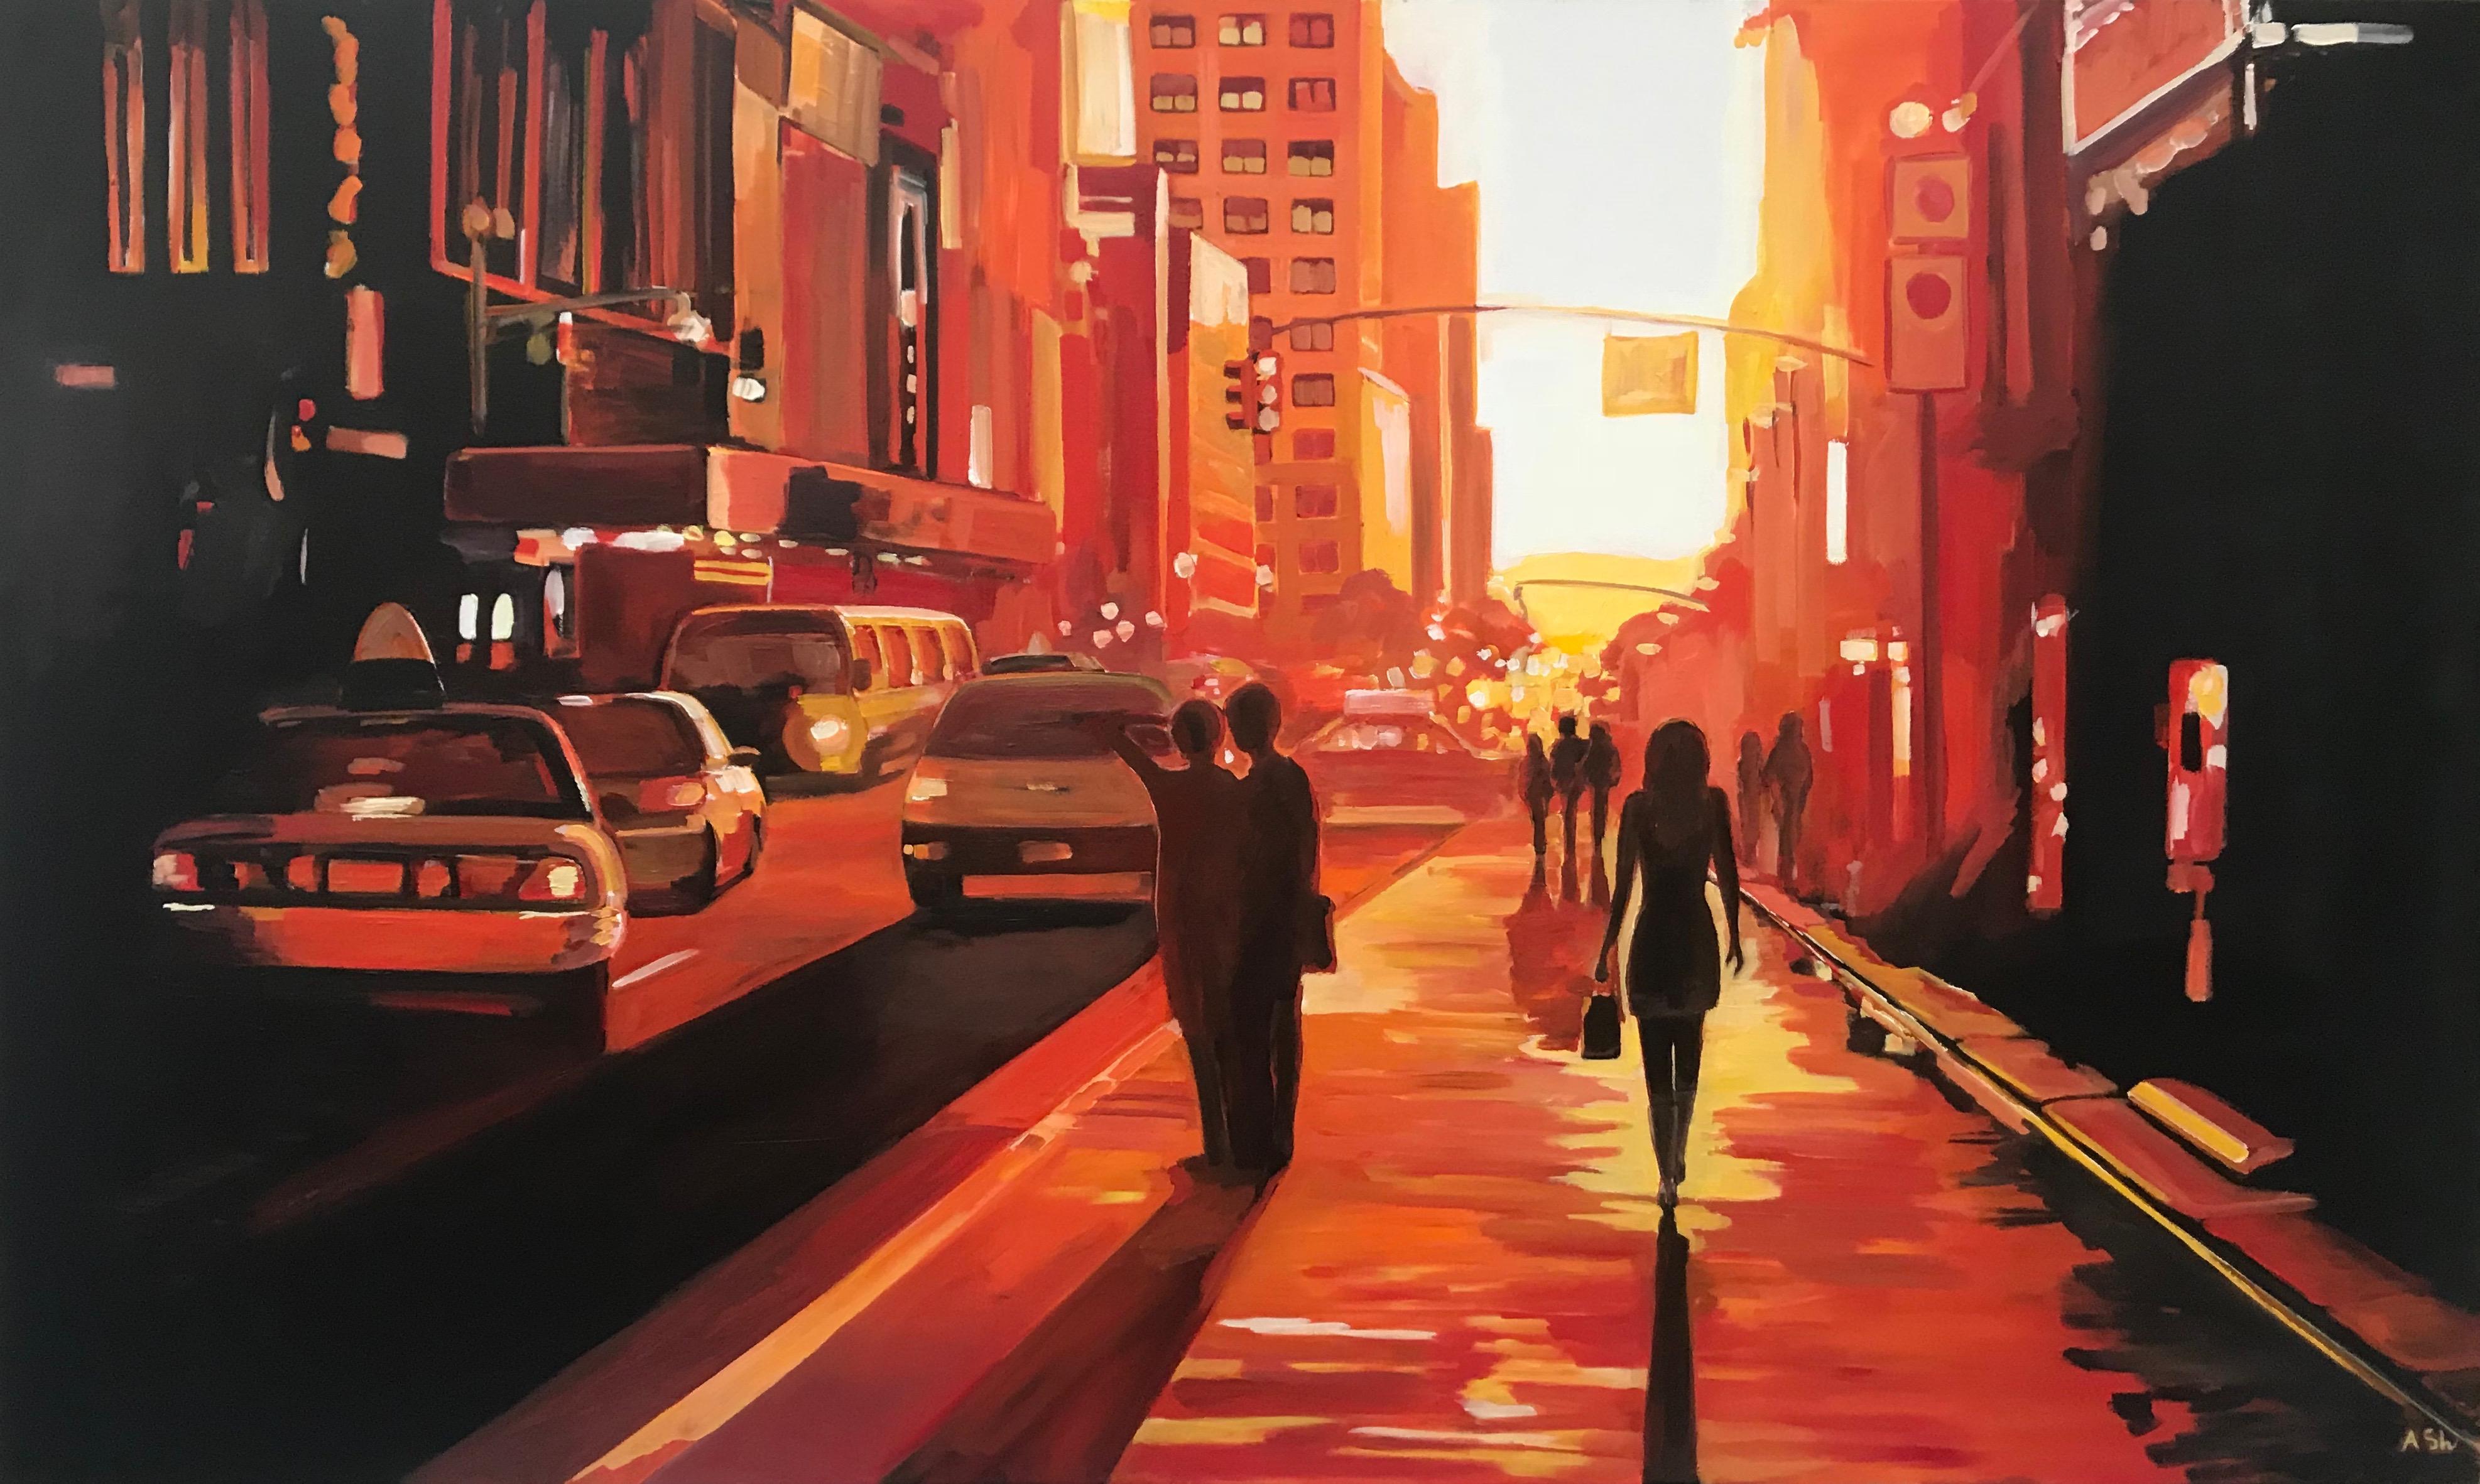 New York Sunshine Figurative Cityscape Limited Edition Print of 'New York Woman' - Cityscape Painting by Leading British Urban Landscape Artist. New York Woman